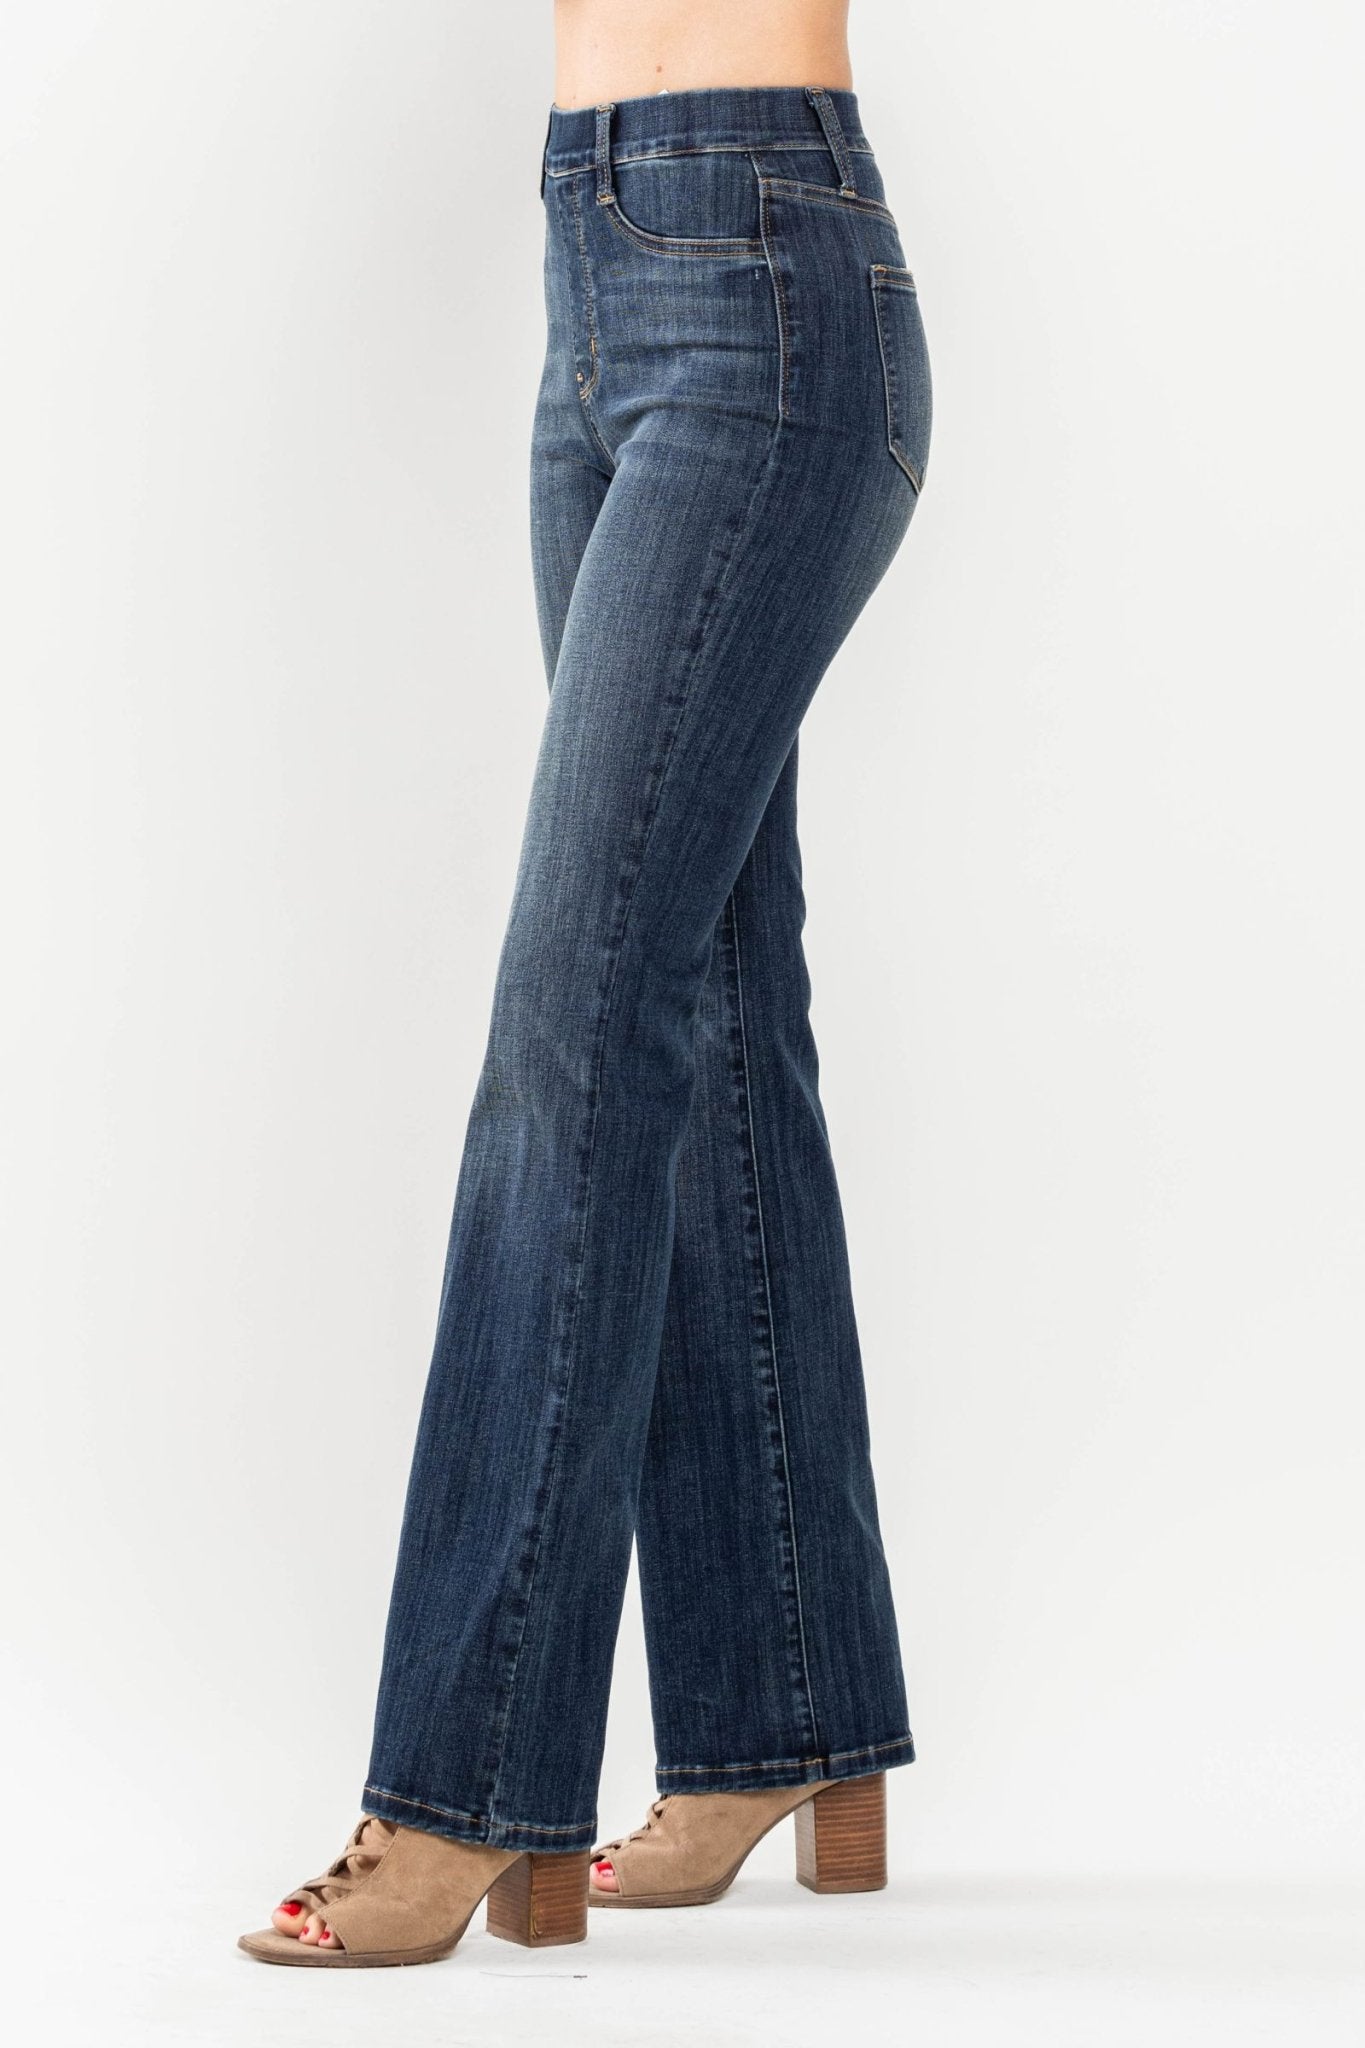 Audrey Pull On Slim Bootcut Jeans - Lavender Hills BeautyJudy Blue